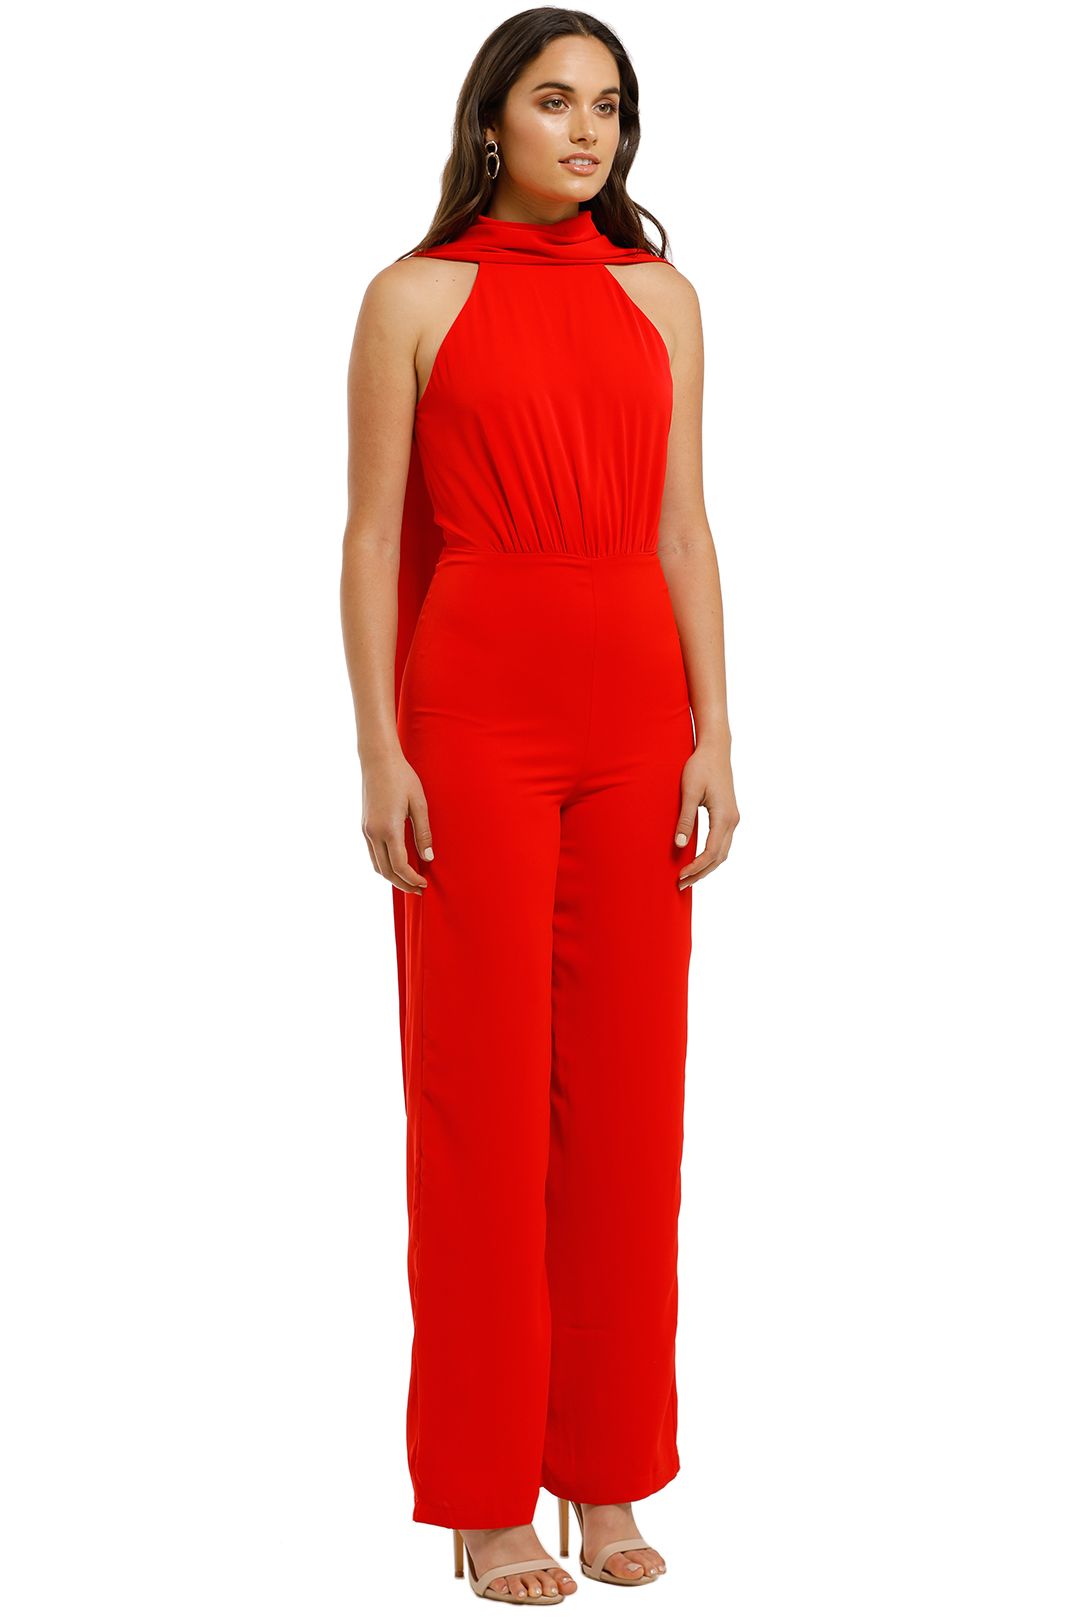 Scarlet Jumpsuit in Red by Bianca and Bridgett for Rent | GlamCorner